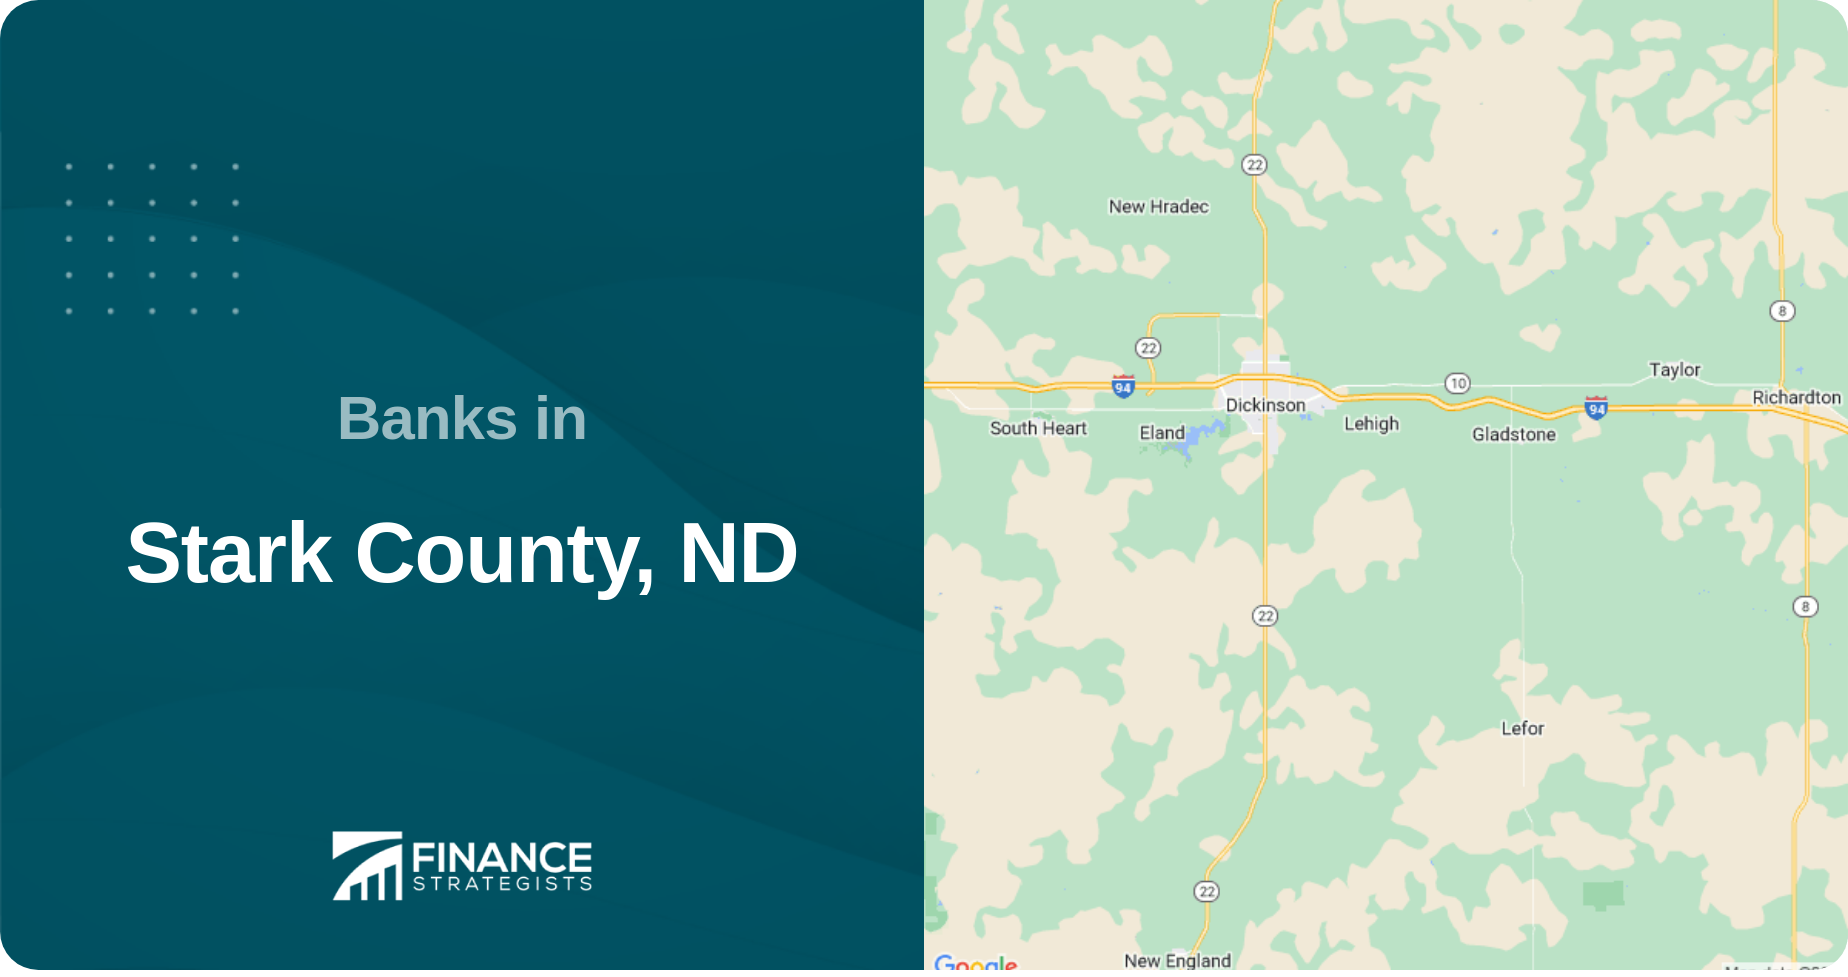 Banks in Stark County, ND